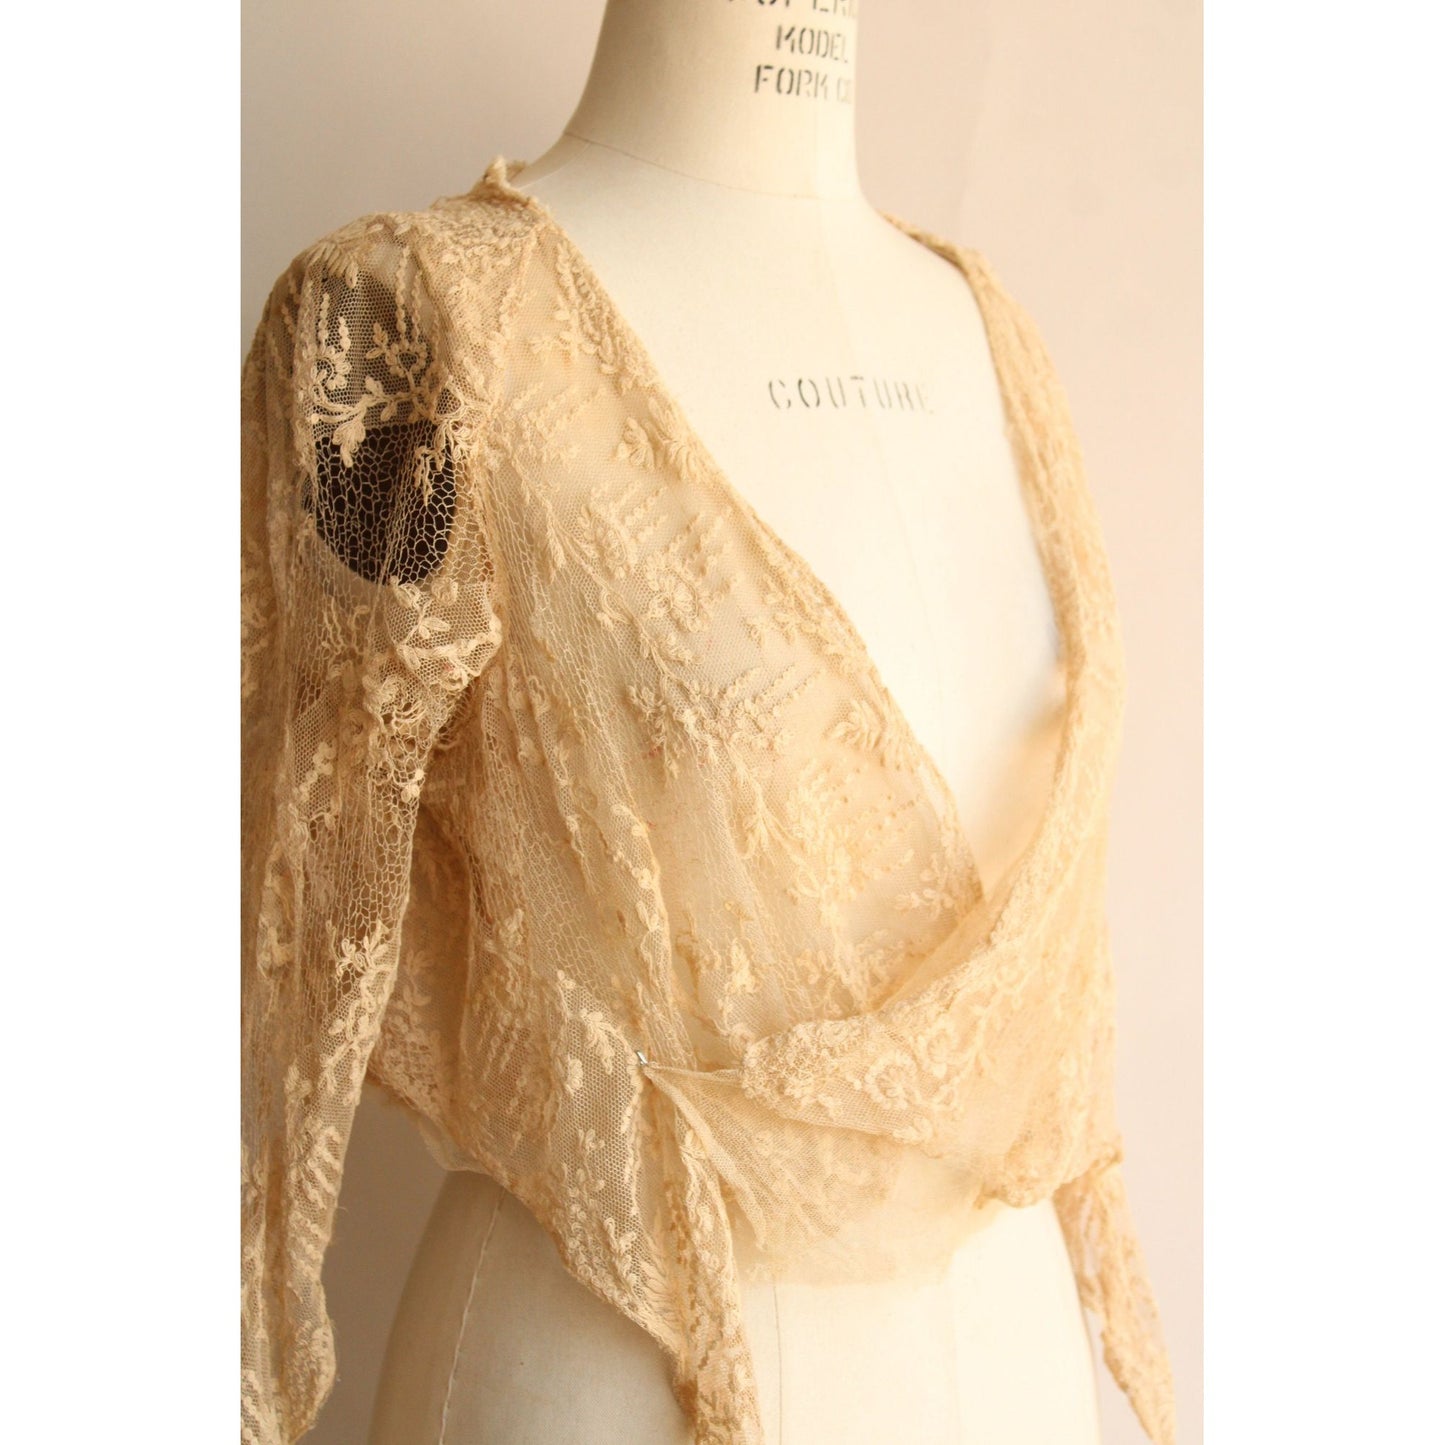 Vintage 1910s Ivory Silk Lace Top